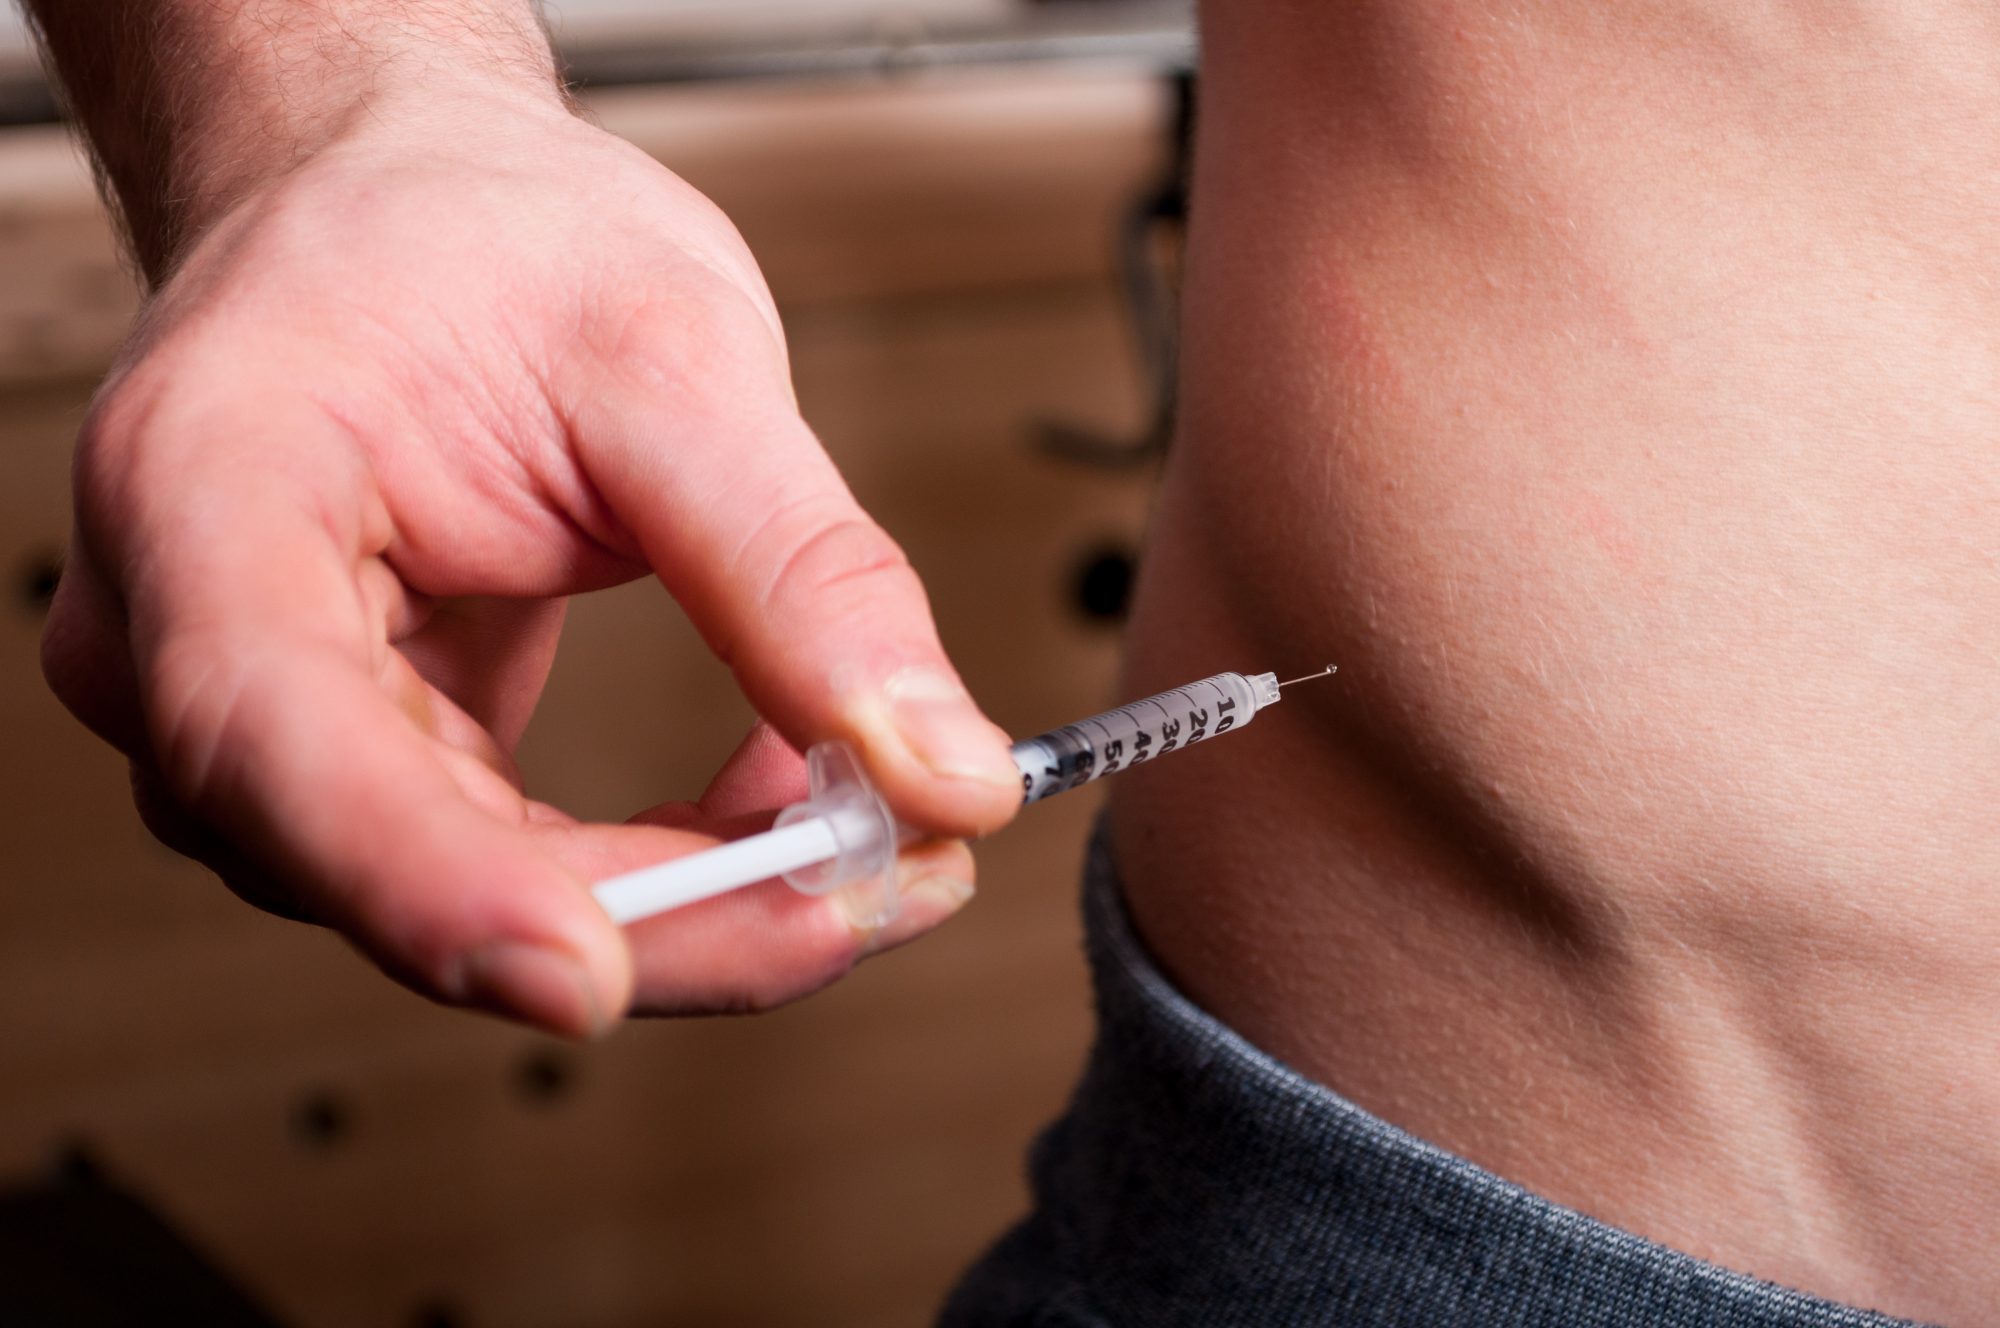 The #1 steroids Mistake, Plus 7 More Lessons